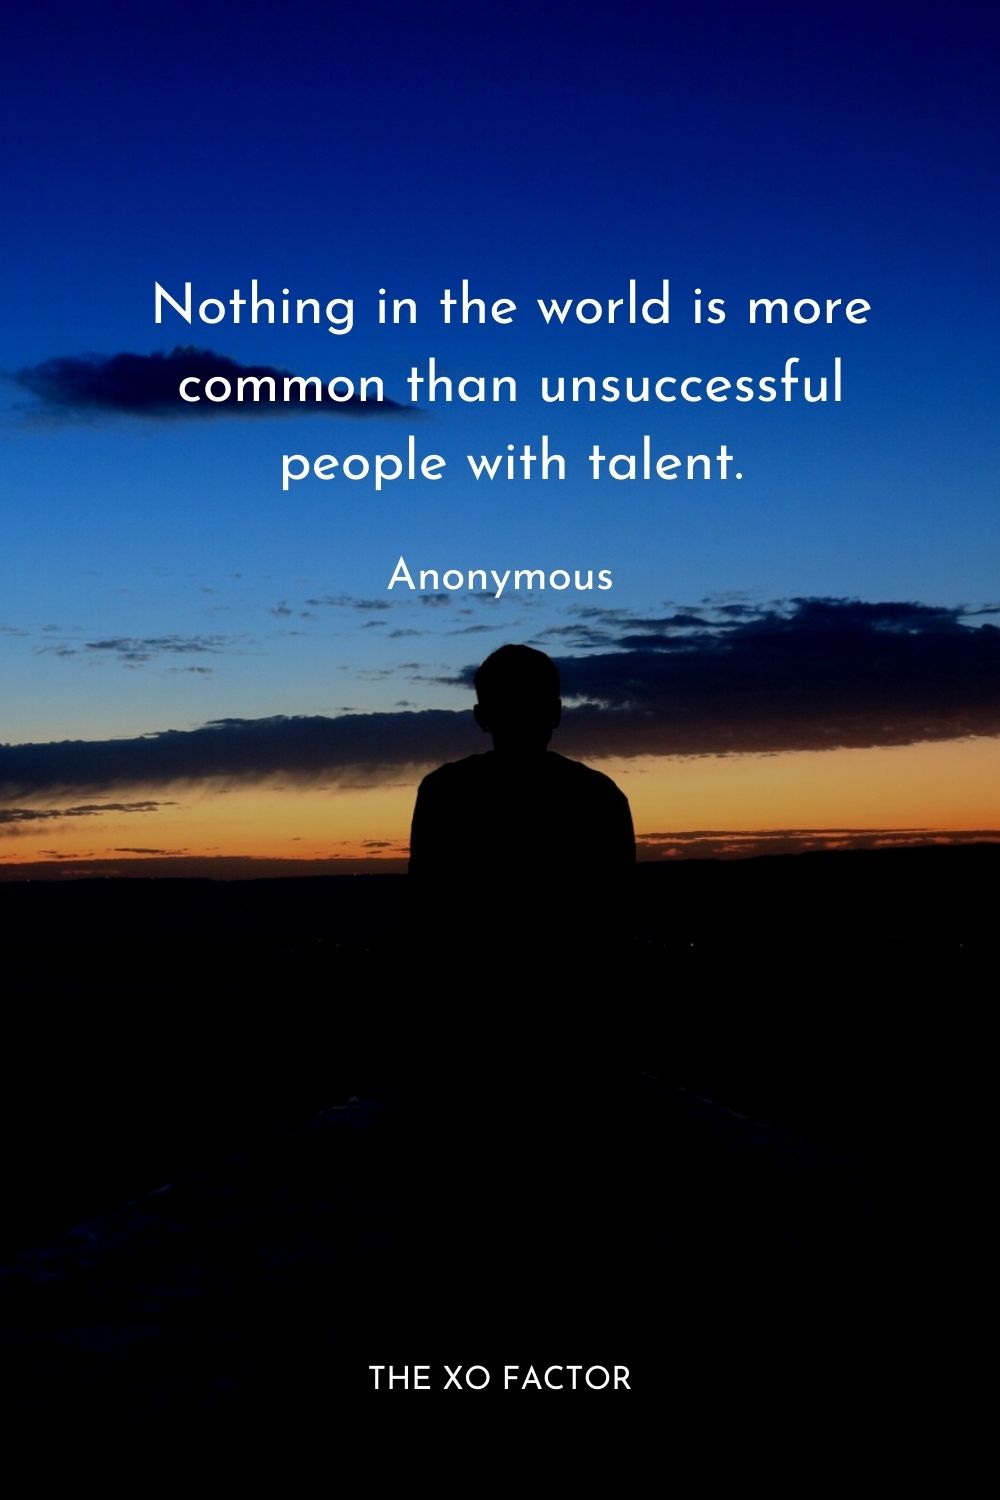 Nothing in the world is more common than unsuccessful people with talent.